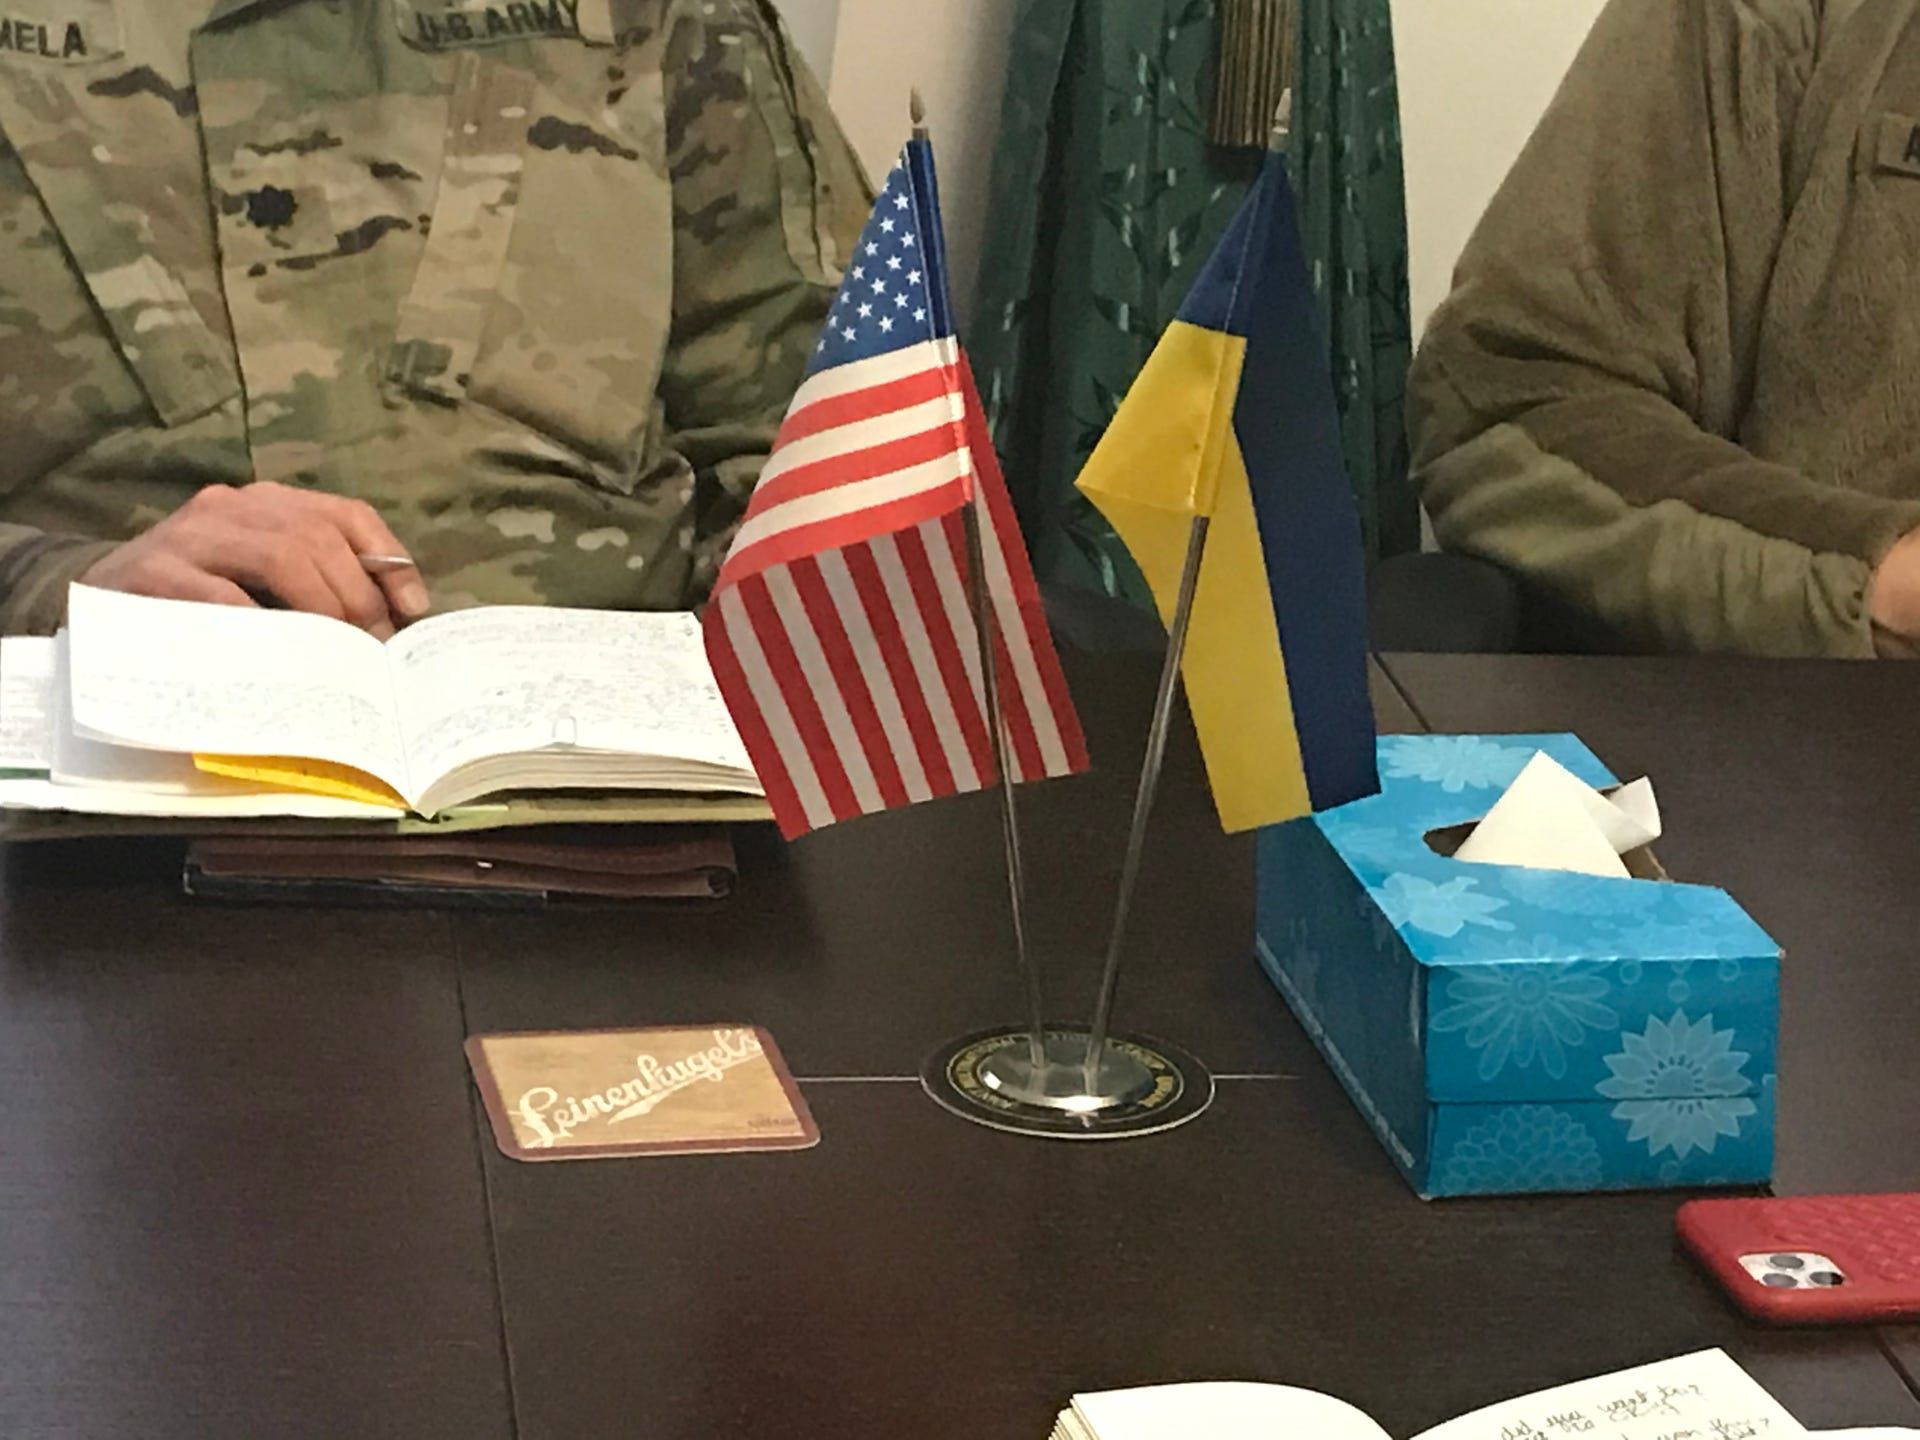 American and Ukrainan flags sit on a conference table in the office of Col. John Oakley and Command Sgt. Maj. Joel Rothbauer at a combat training facility in Ukraine. Rothbauer lives in Chippewa Falls and brought the Leinenkugel's coasters from home. Image by Meg Jones / Milwaukee Journal Sentinel. Ukraine, 2020.